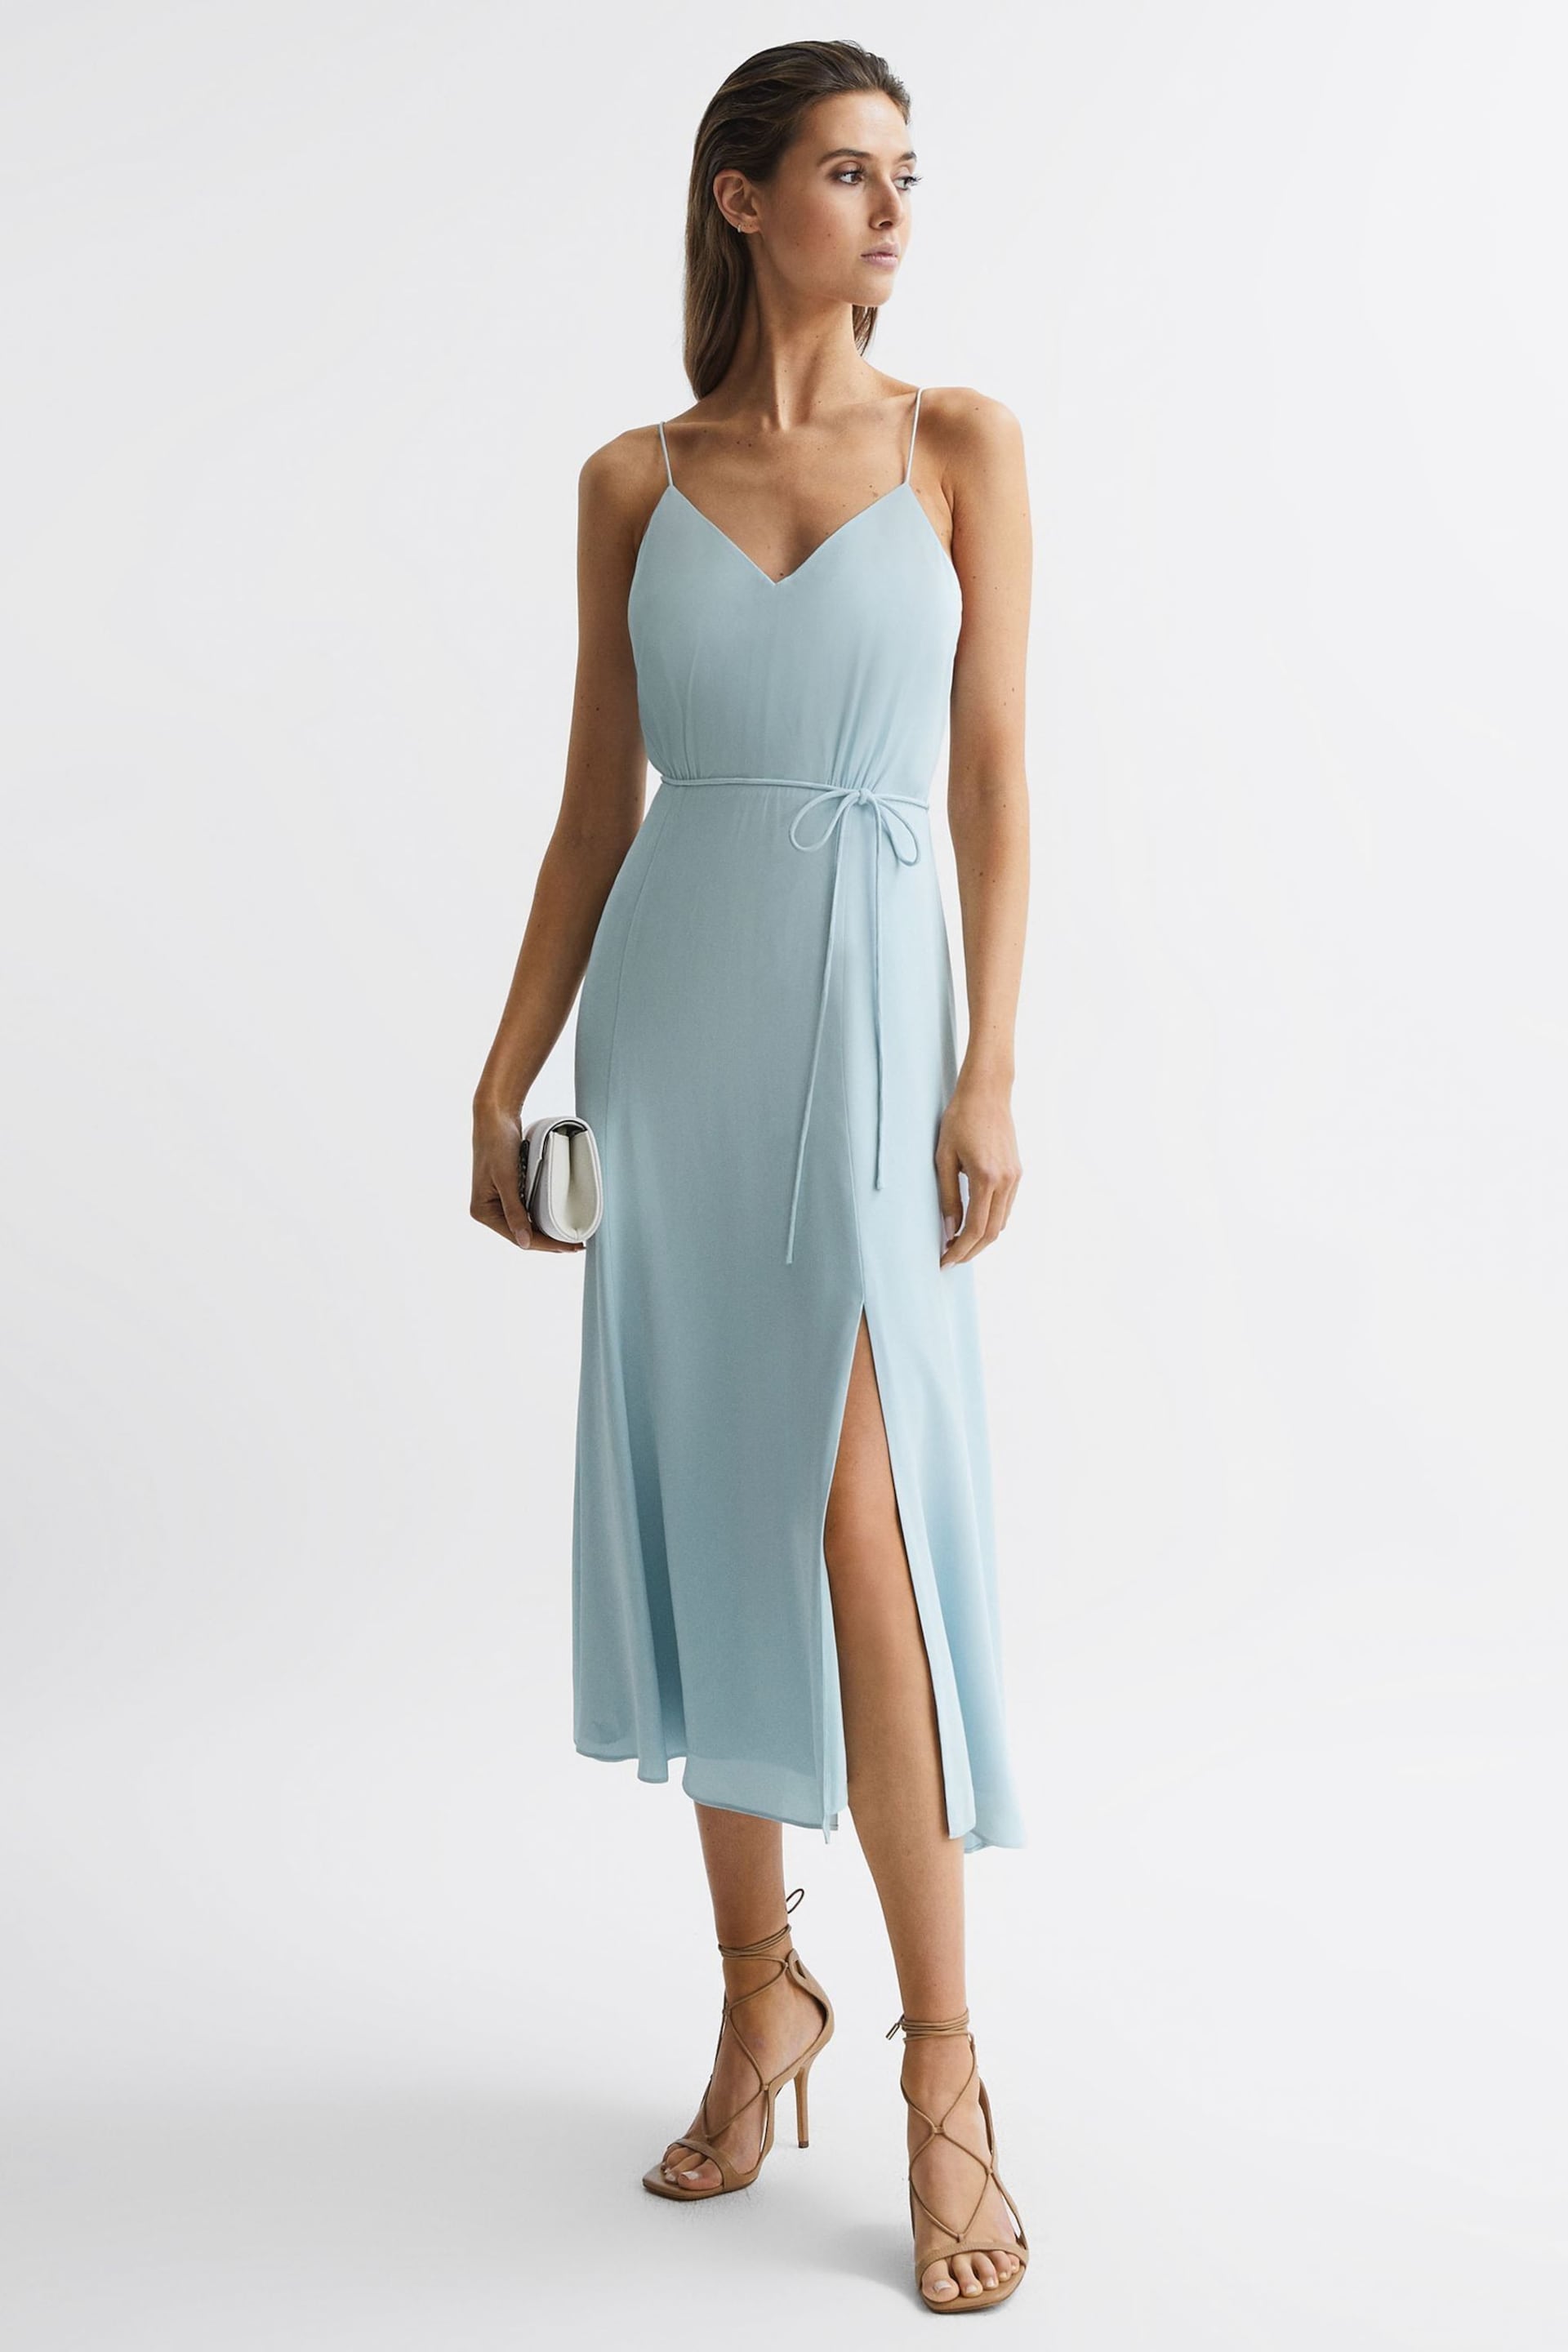 Reiss Blue Penny Fitted V-Neck Midi Dress - Image 1 of 6